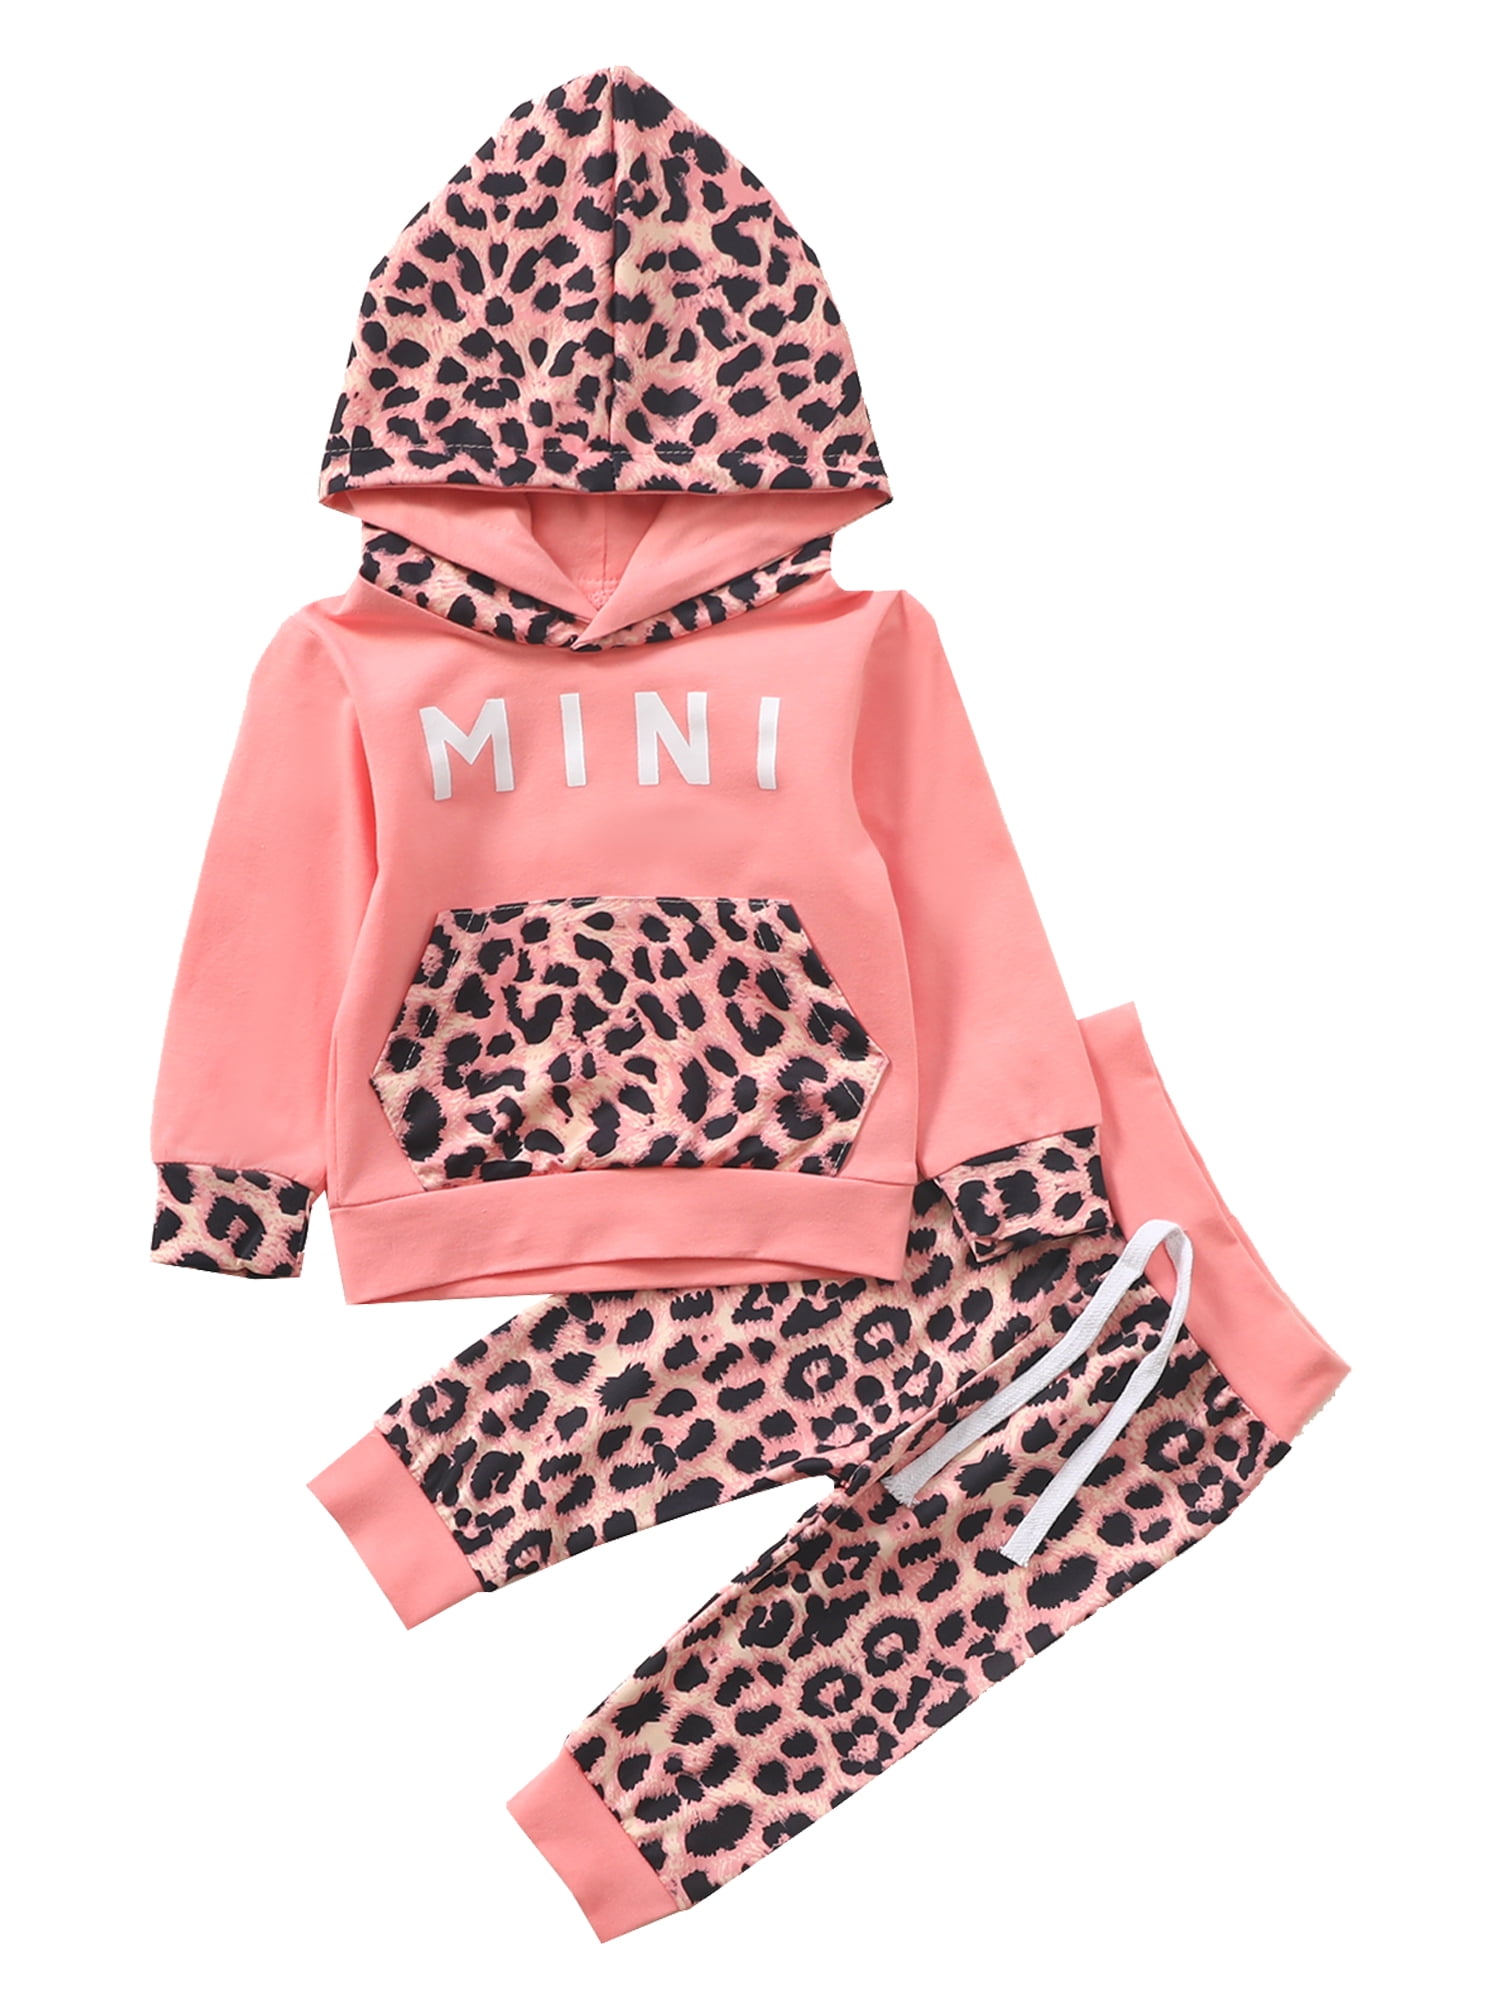 2PCS Kids Baby Girl Leopard Print Hooded Hoodie Tops Pants Tracksuit Outfits Set 